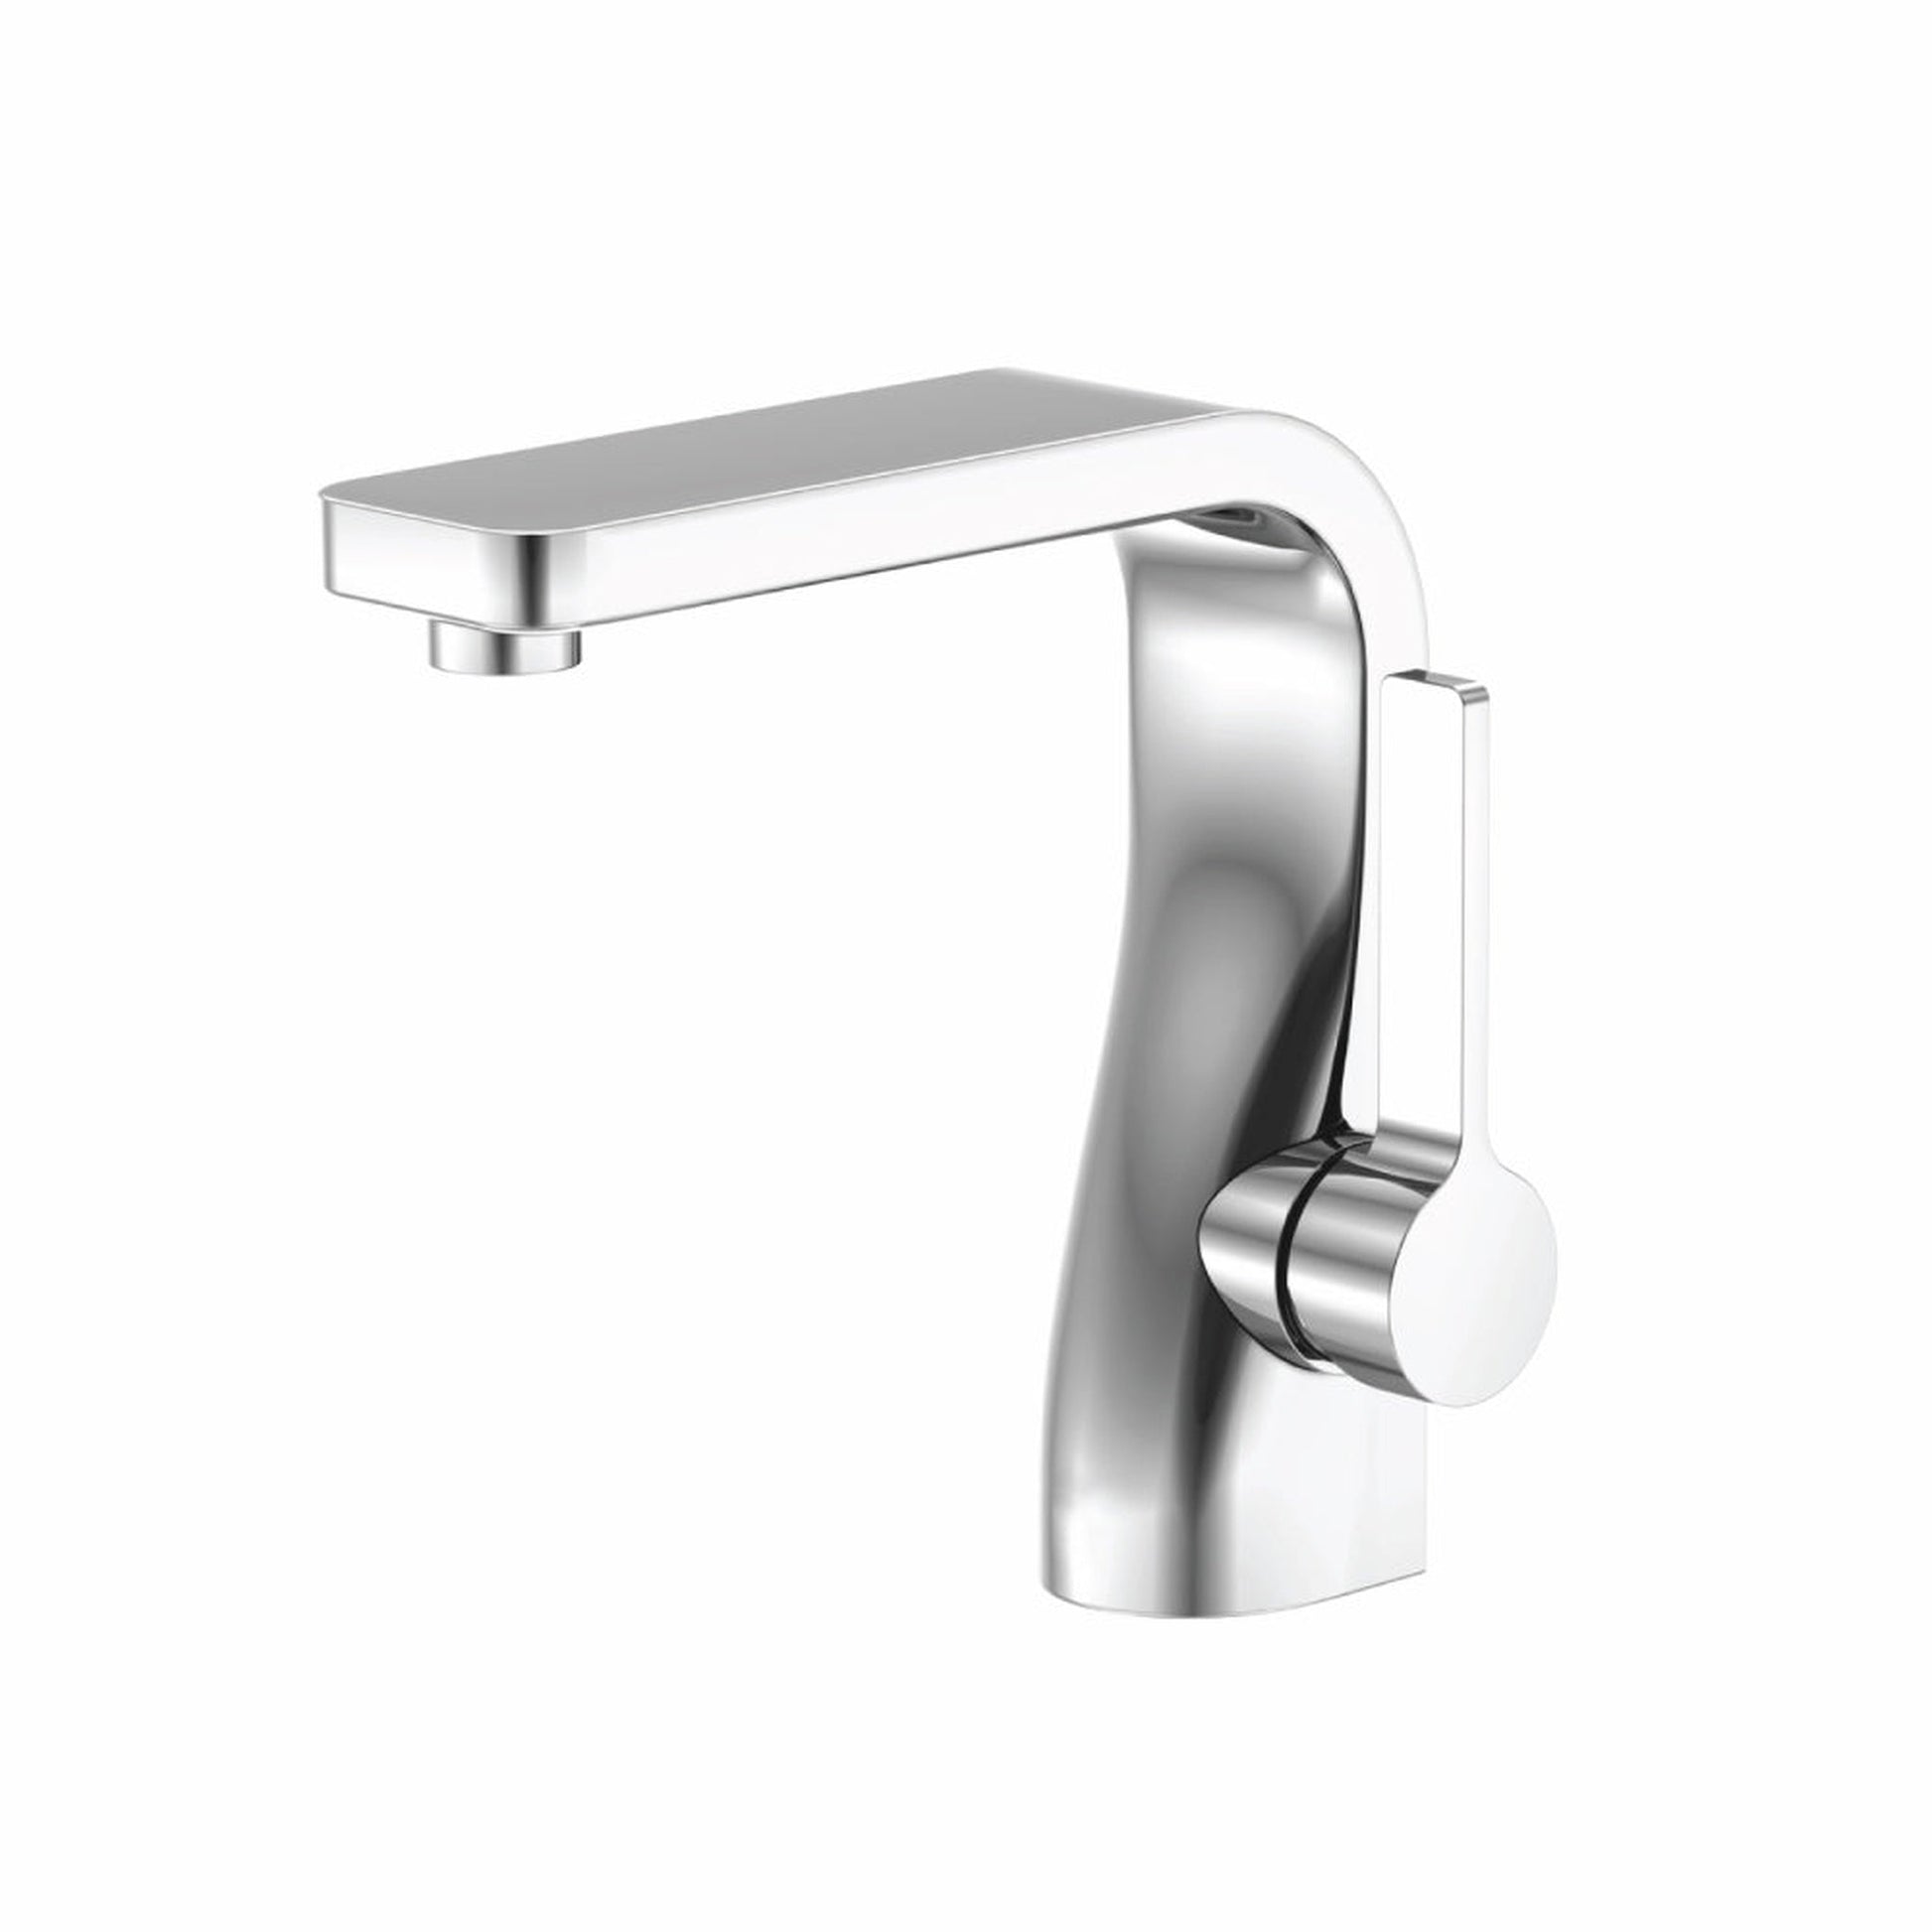 Isenberg Serie 260 6" Single-Hole Polished Nickel PVD Deck-Mounted Bathroom Sink Faucet With Pop-Up Drain